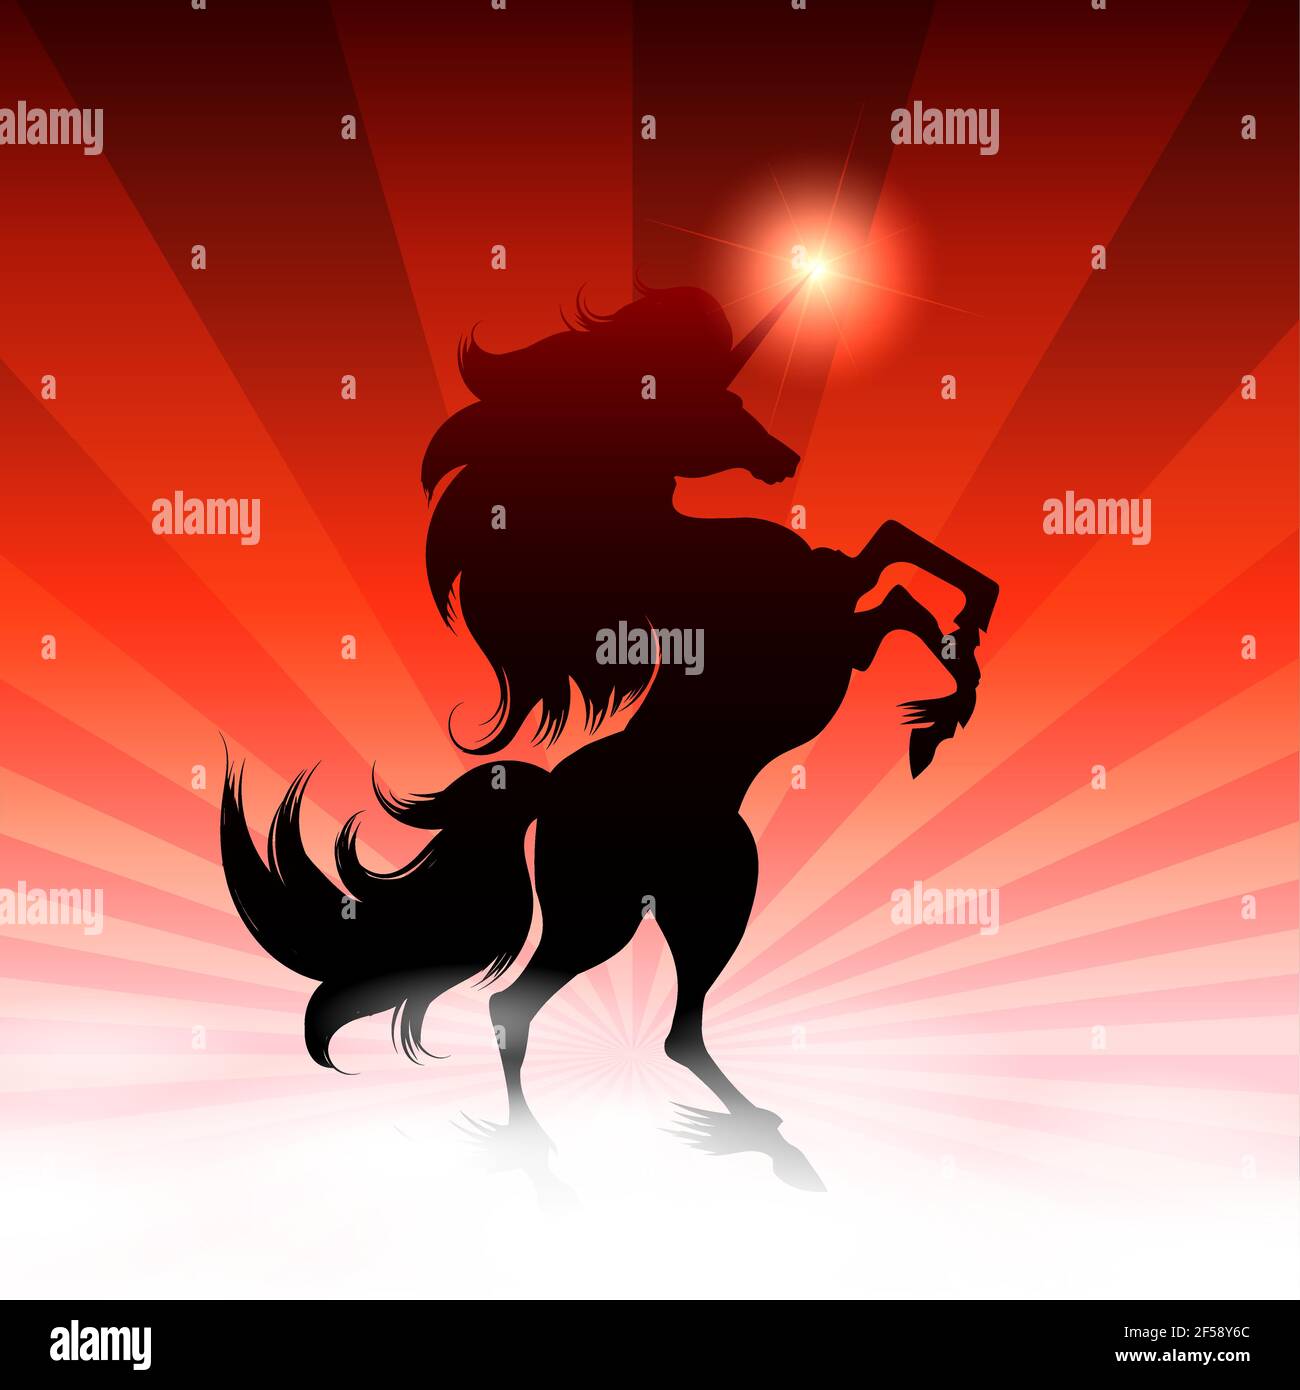 Black Unicorn and shining Star on Colorful background. Vector Illustration. Stock Vector